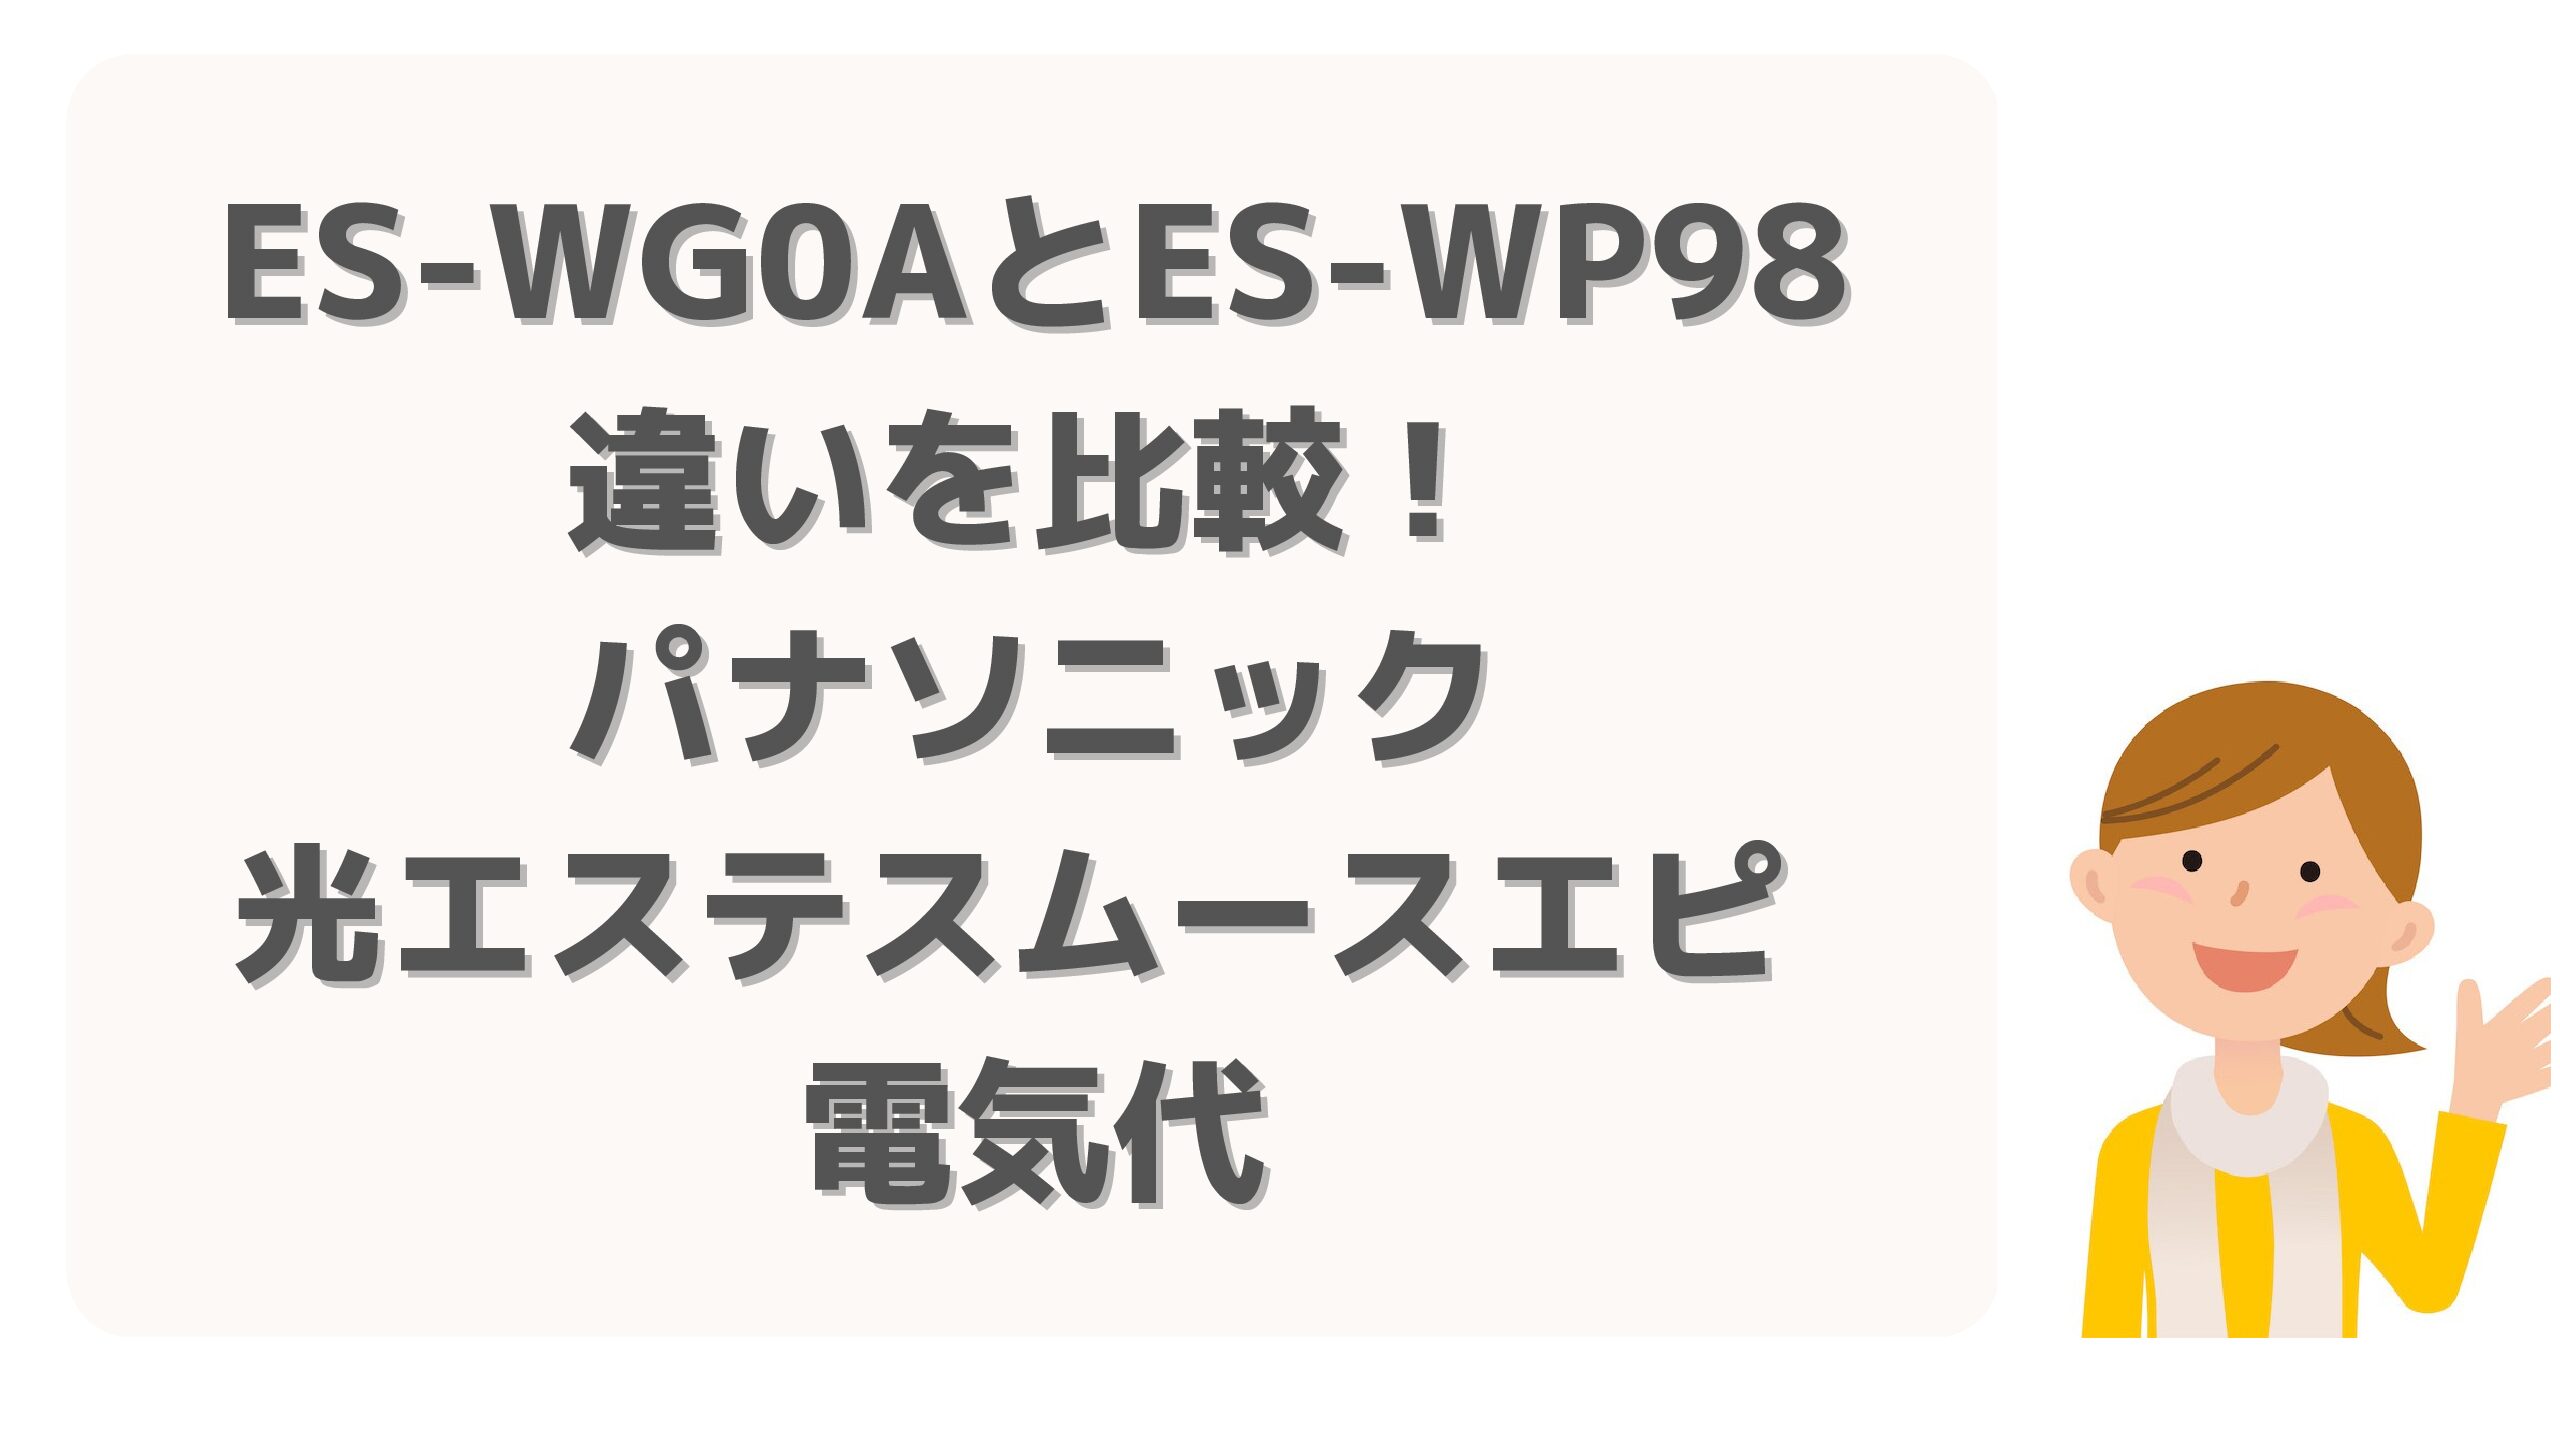 ES-WG0AとES-WP98の違いを比較！パナソニック光エステスムースエピ 